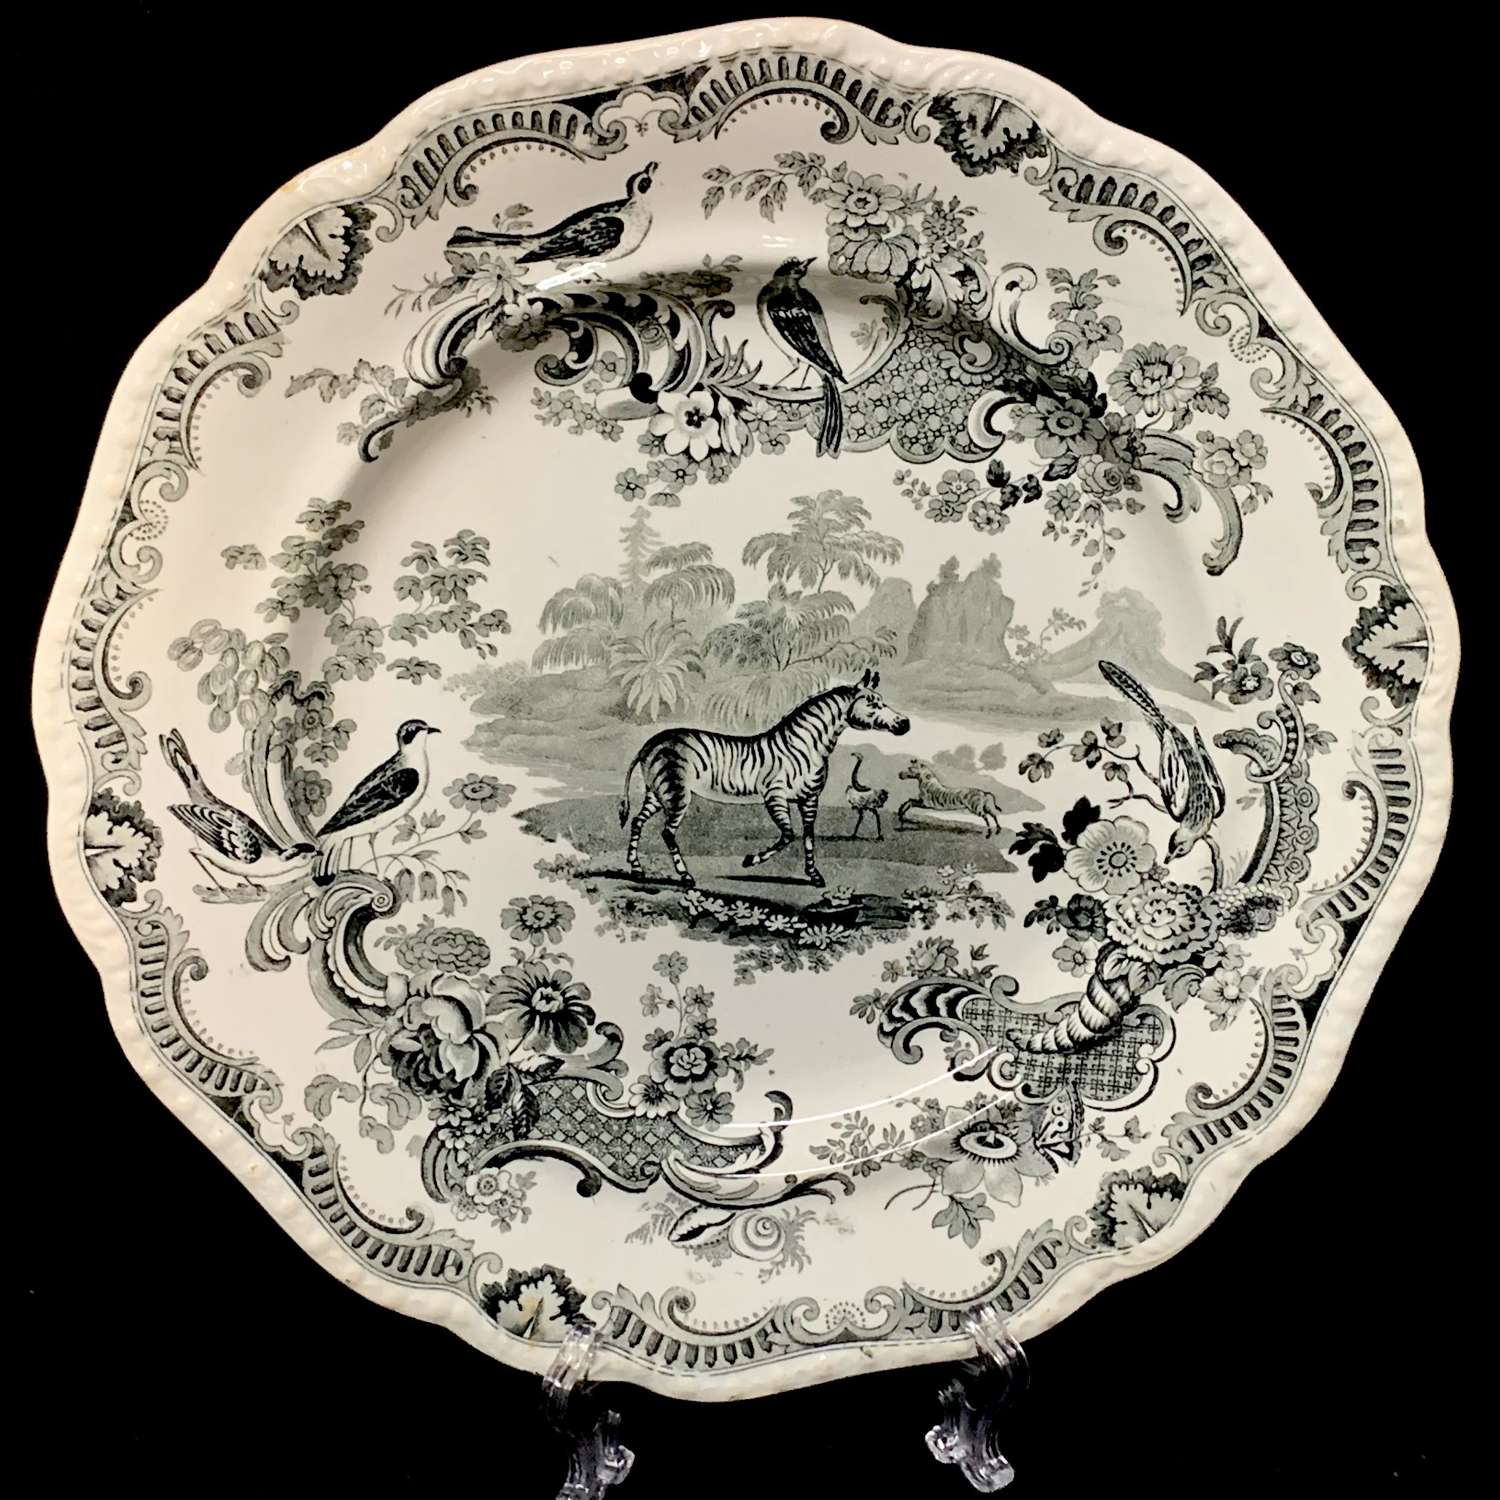 ZOOLOGICAL SKETCHES Staffordshire Plate ~ ZEBRA 1820